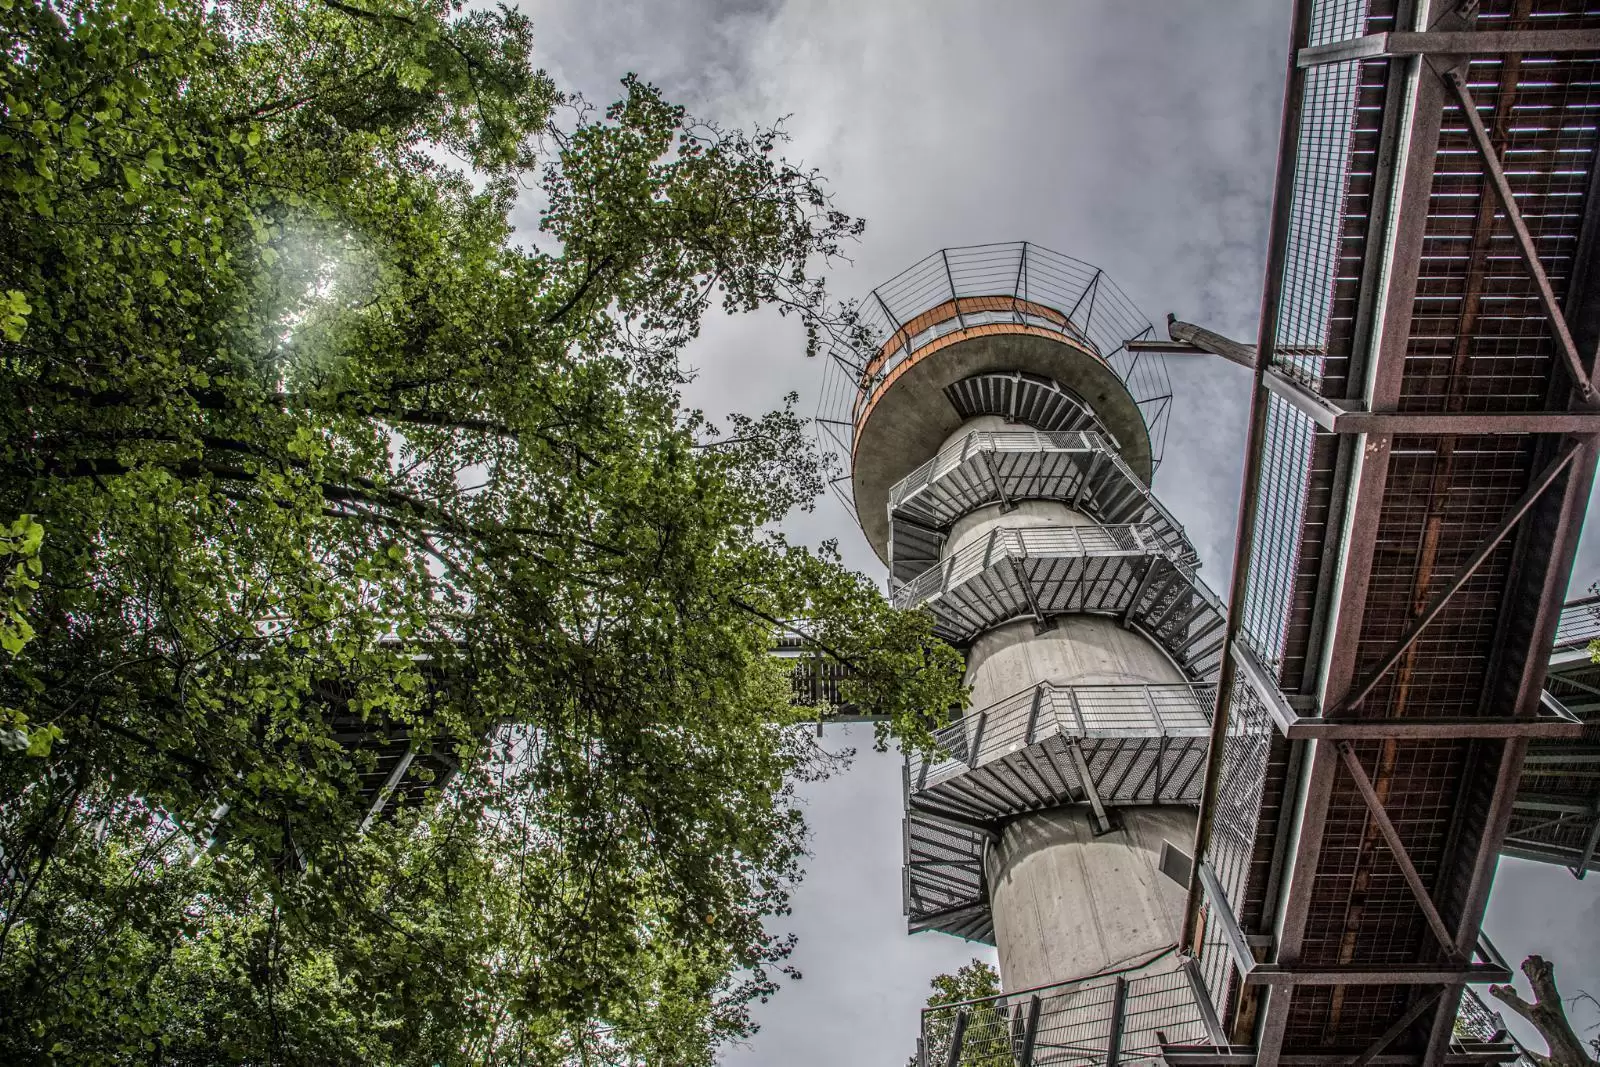 Reaching heights: Our observation tower tips in Germany